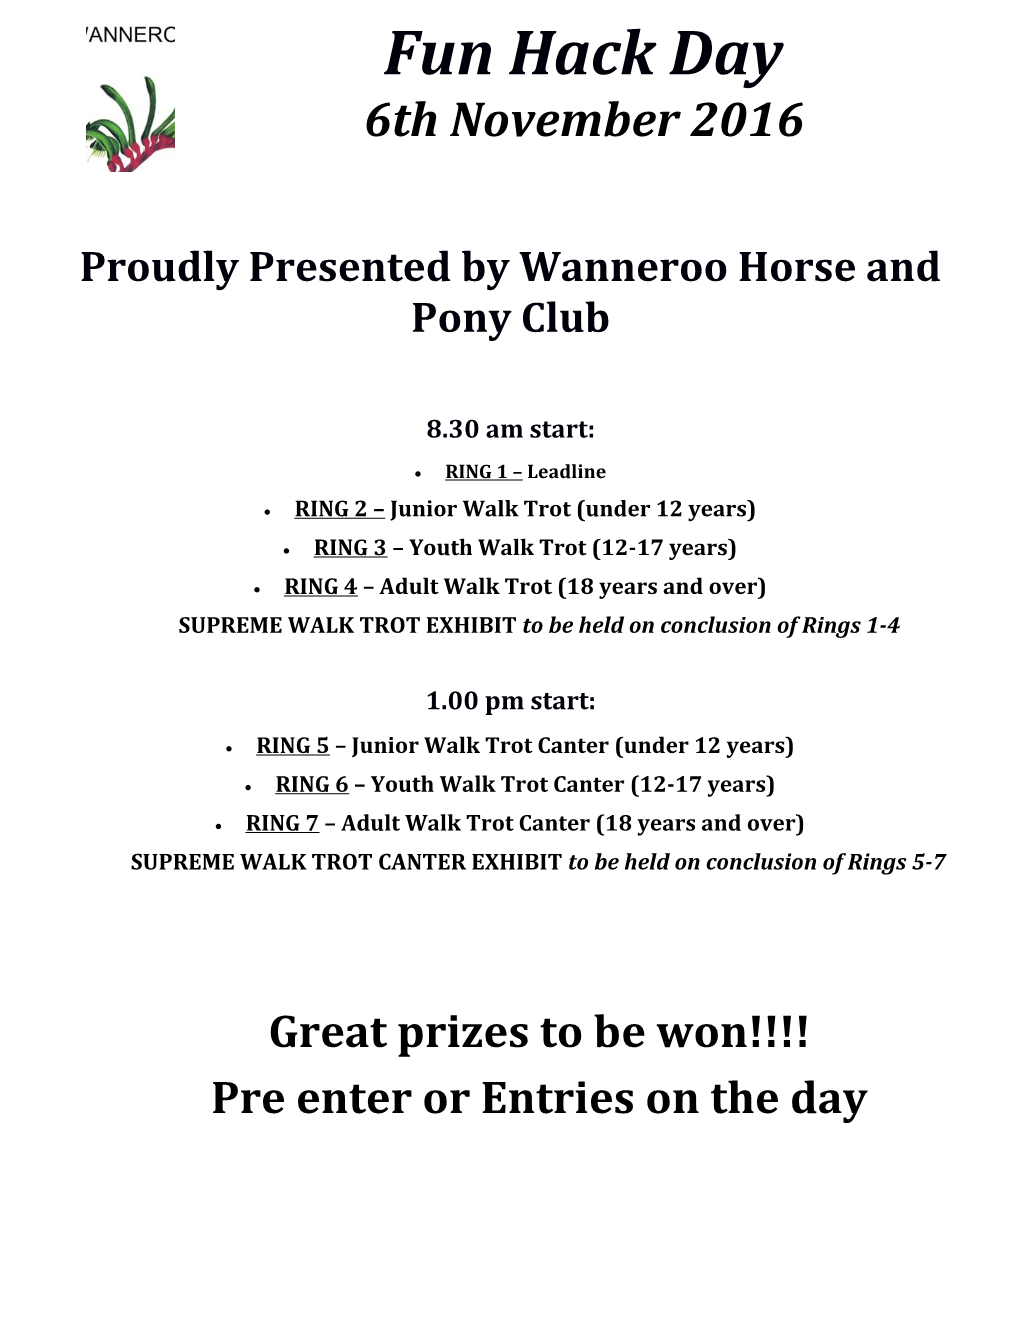 Proudly Presented by Wanneroo Horse and Pony Club